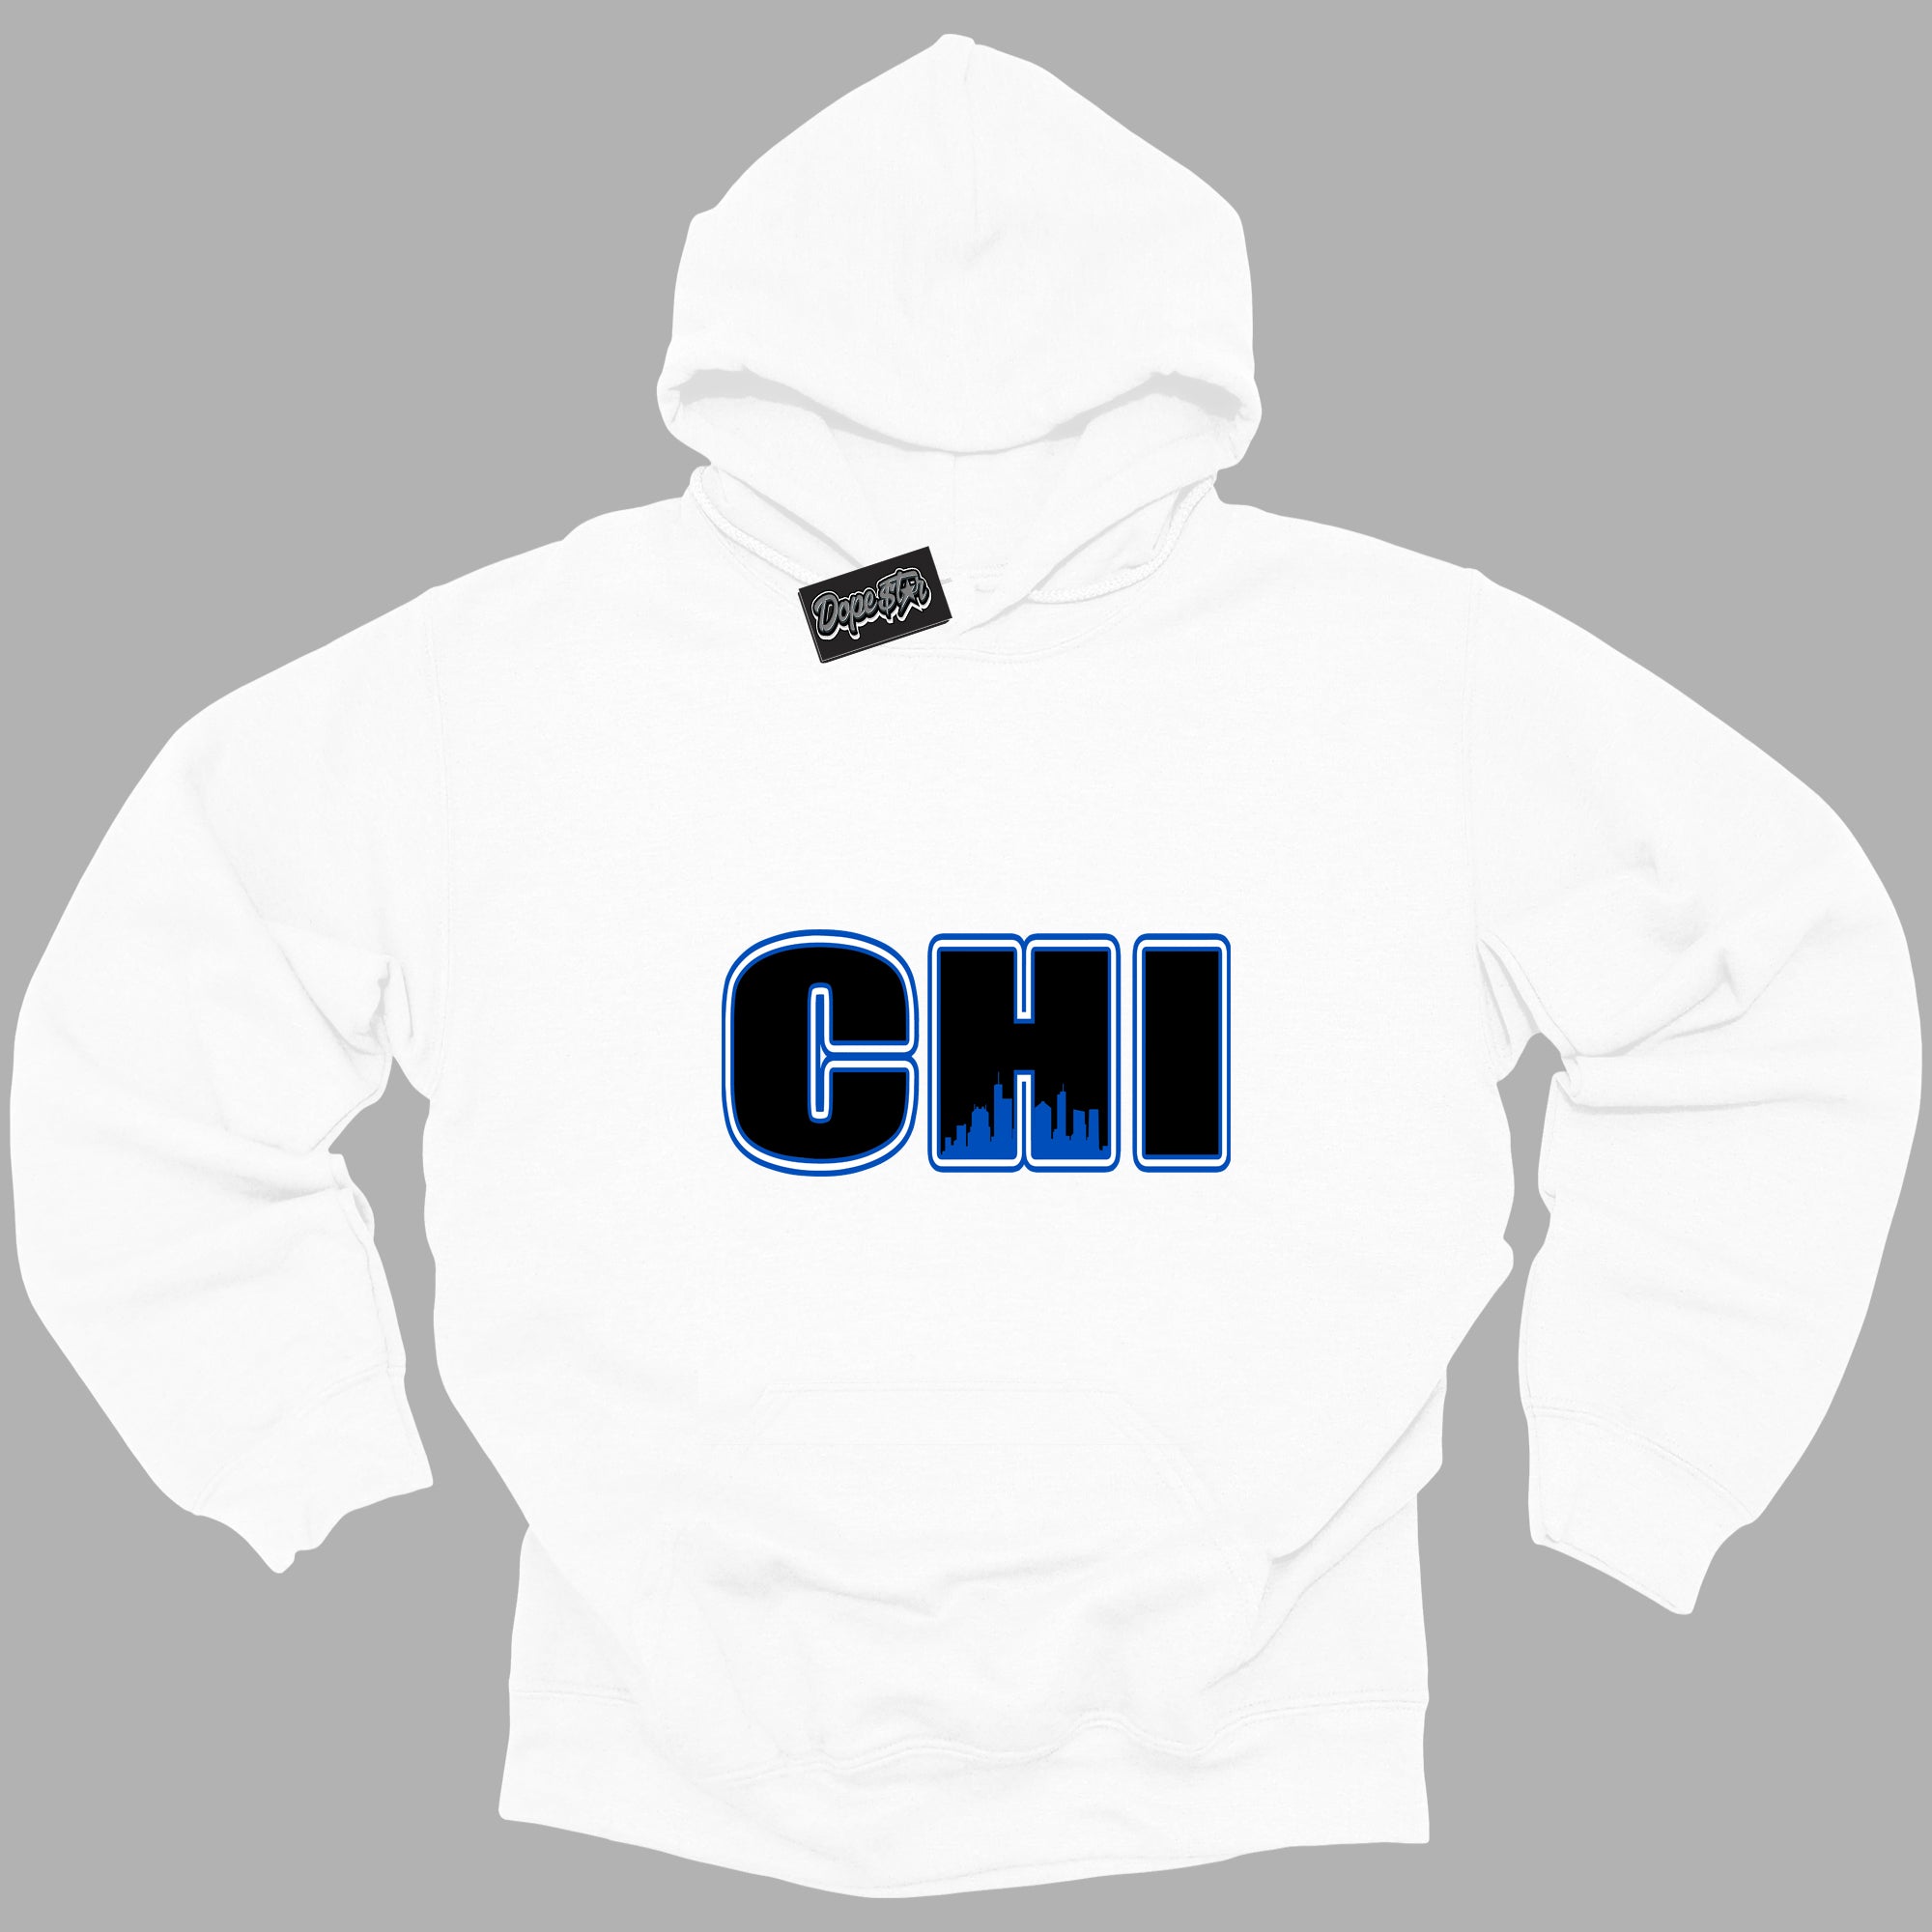 Cool White Hoodie with “ Chicago ”  design that Perfectly Matches Royal Reimagined 1s Sneakers.